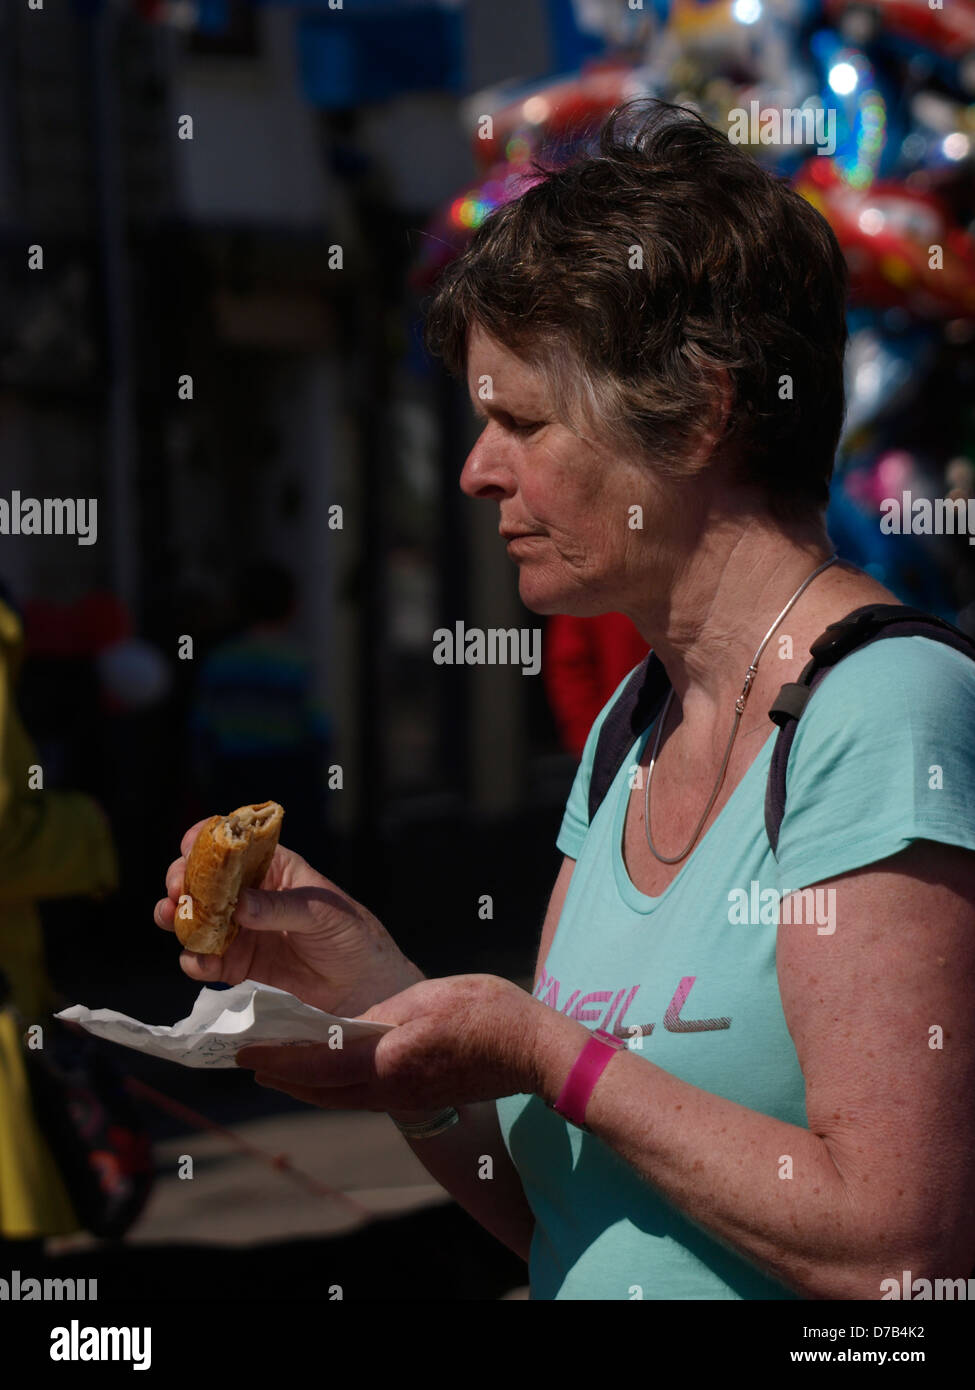 Middle-aged woman eating a sausage roll, UK 2013 Stock Photo